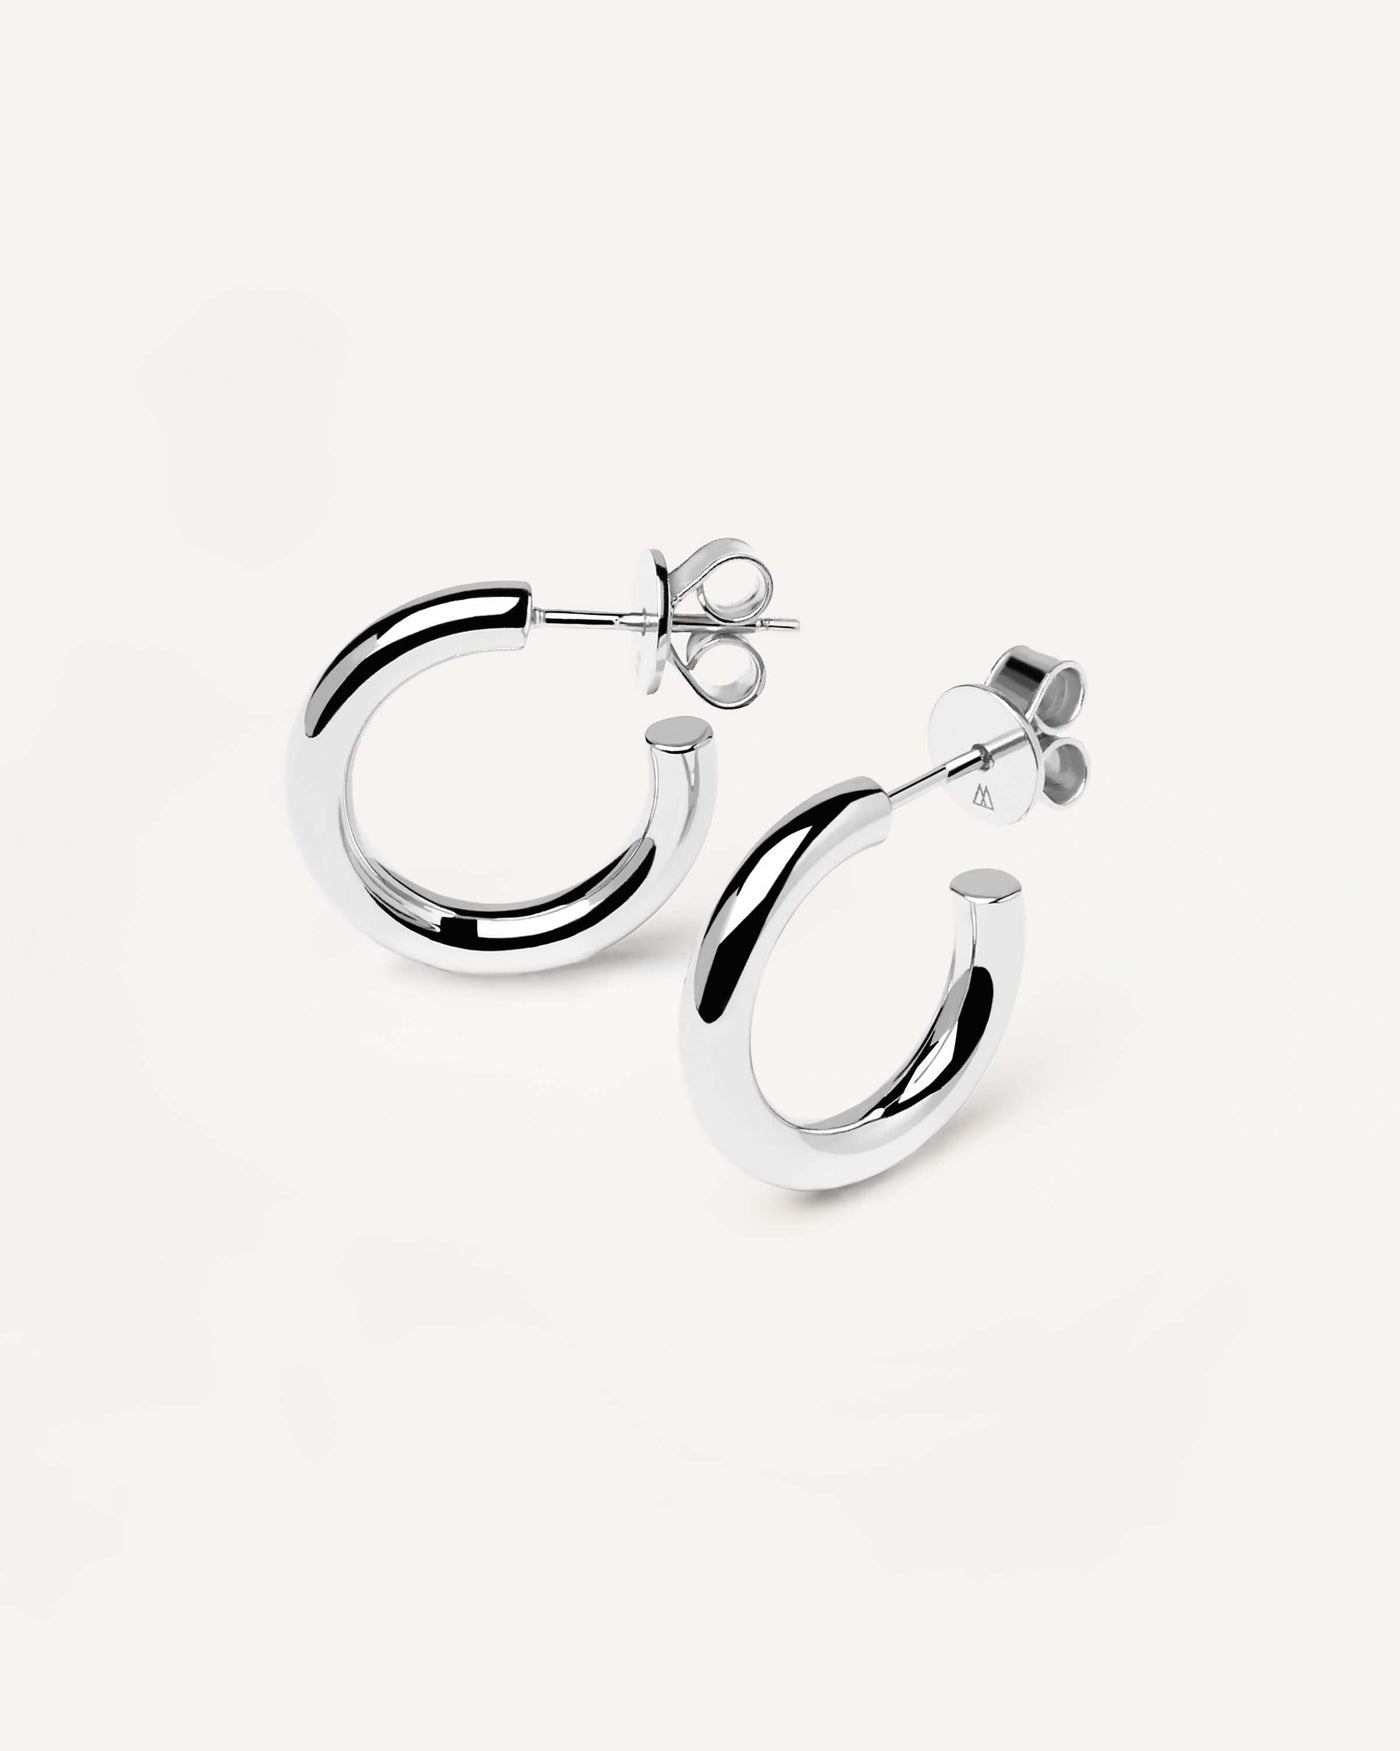 2023 Selection | Medium Cloud Silver Earrings. C-hoop earrings in 925 sterling silver with a butterfly push-back. Get the latest arrival from PDPAOLA. Place your order safely and get this Best Seller. Free Shipping.